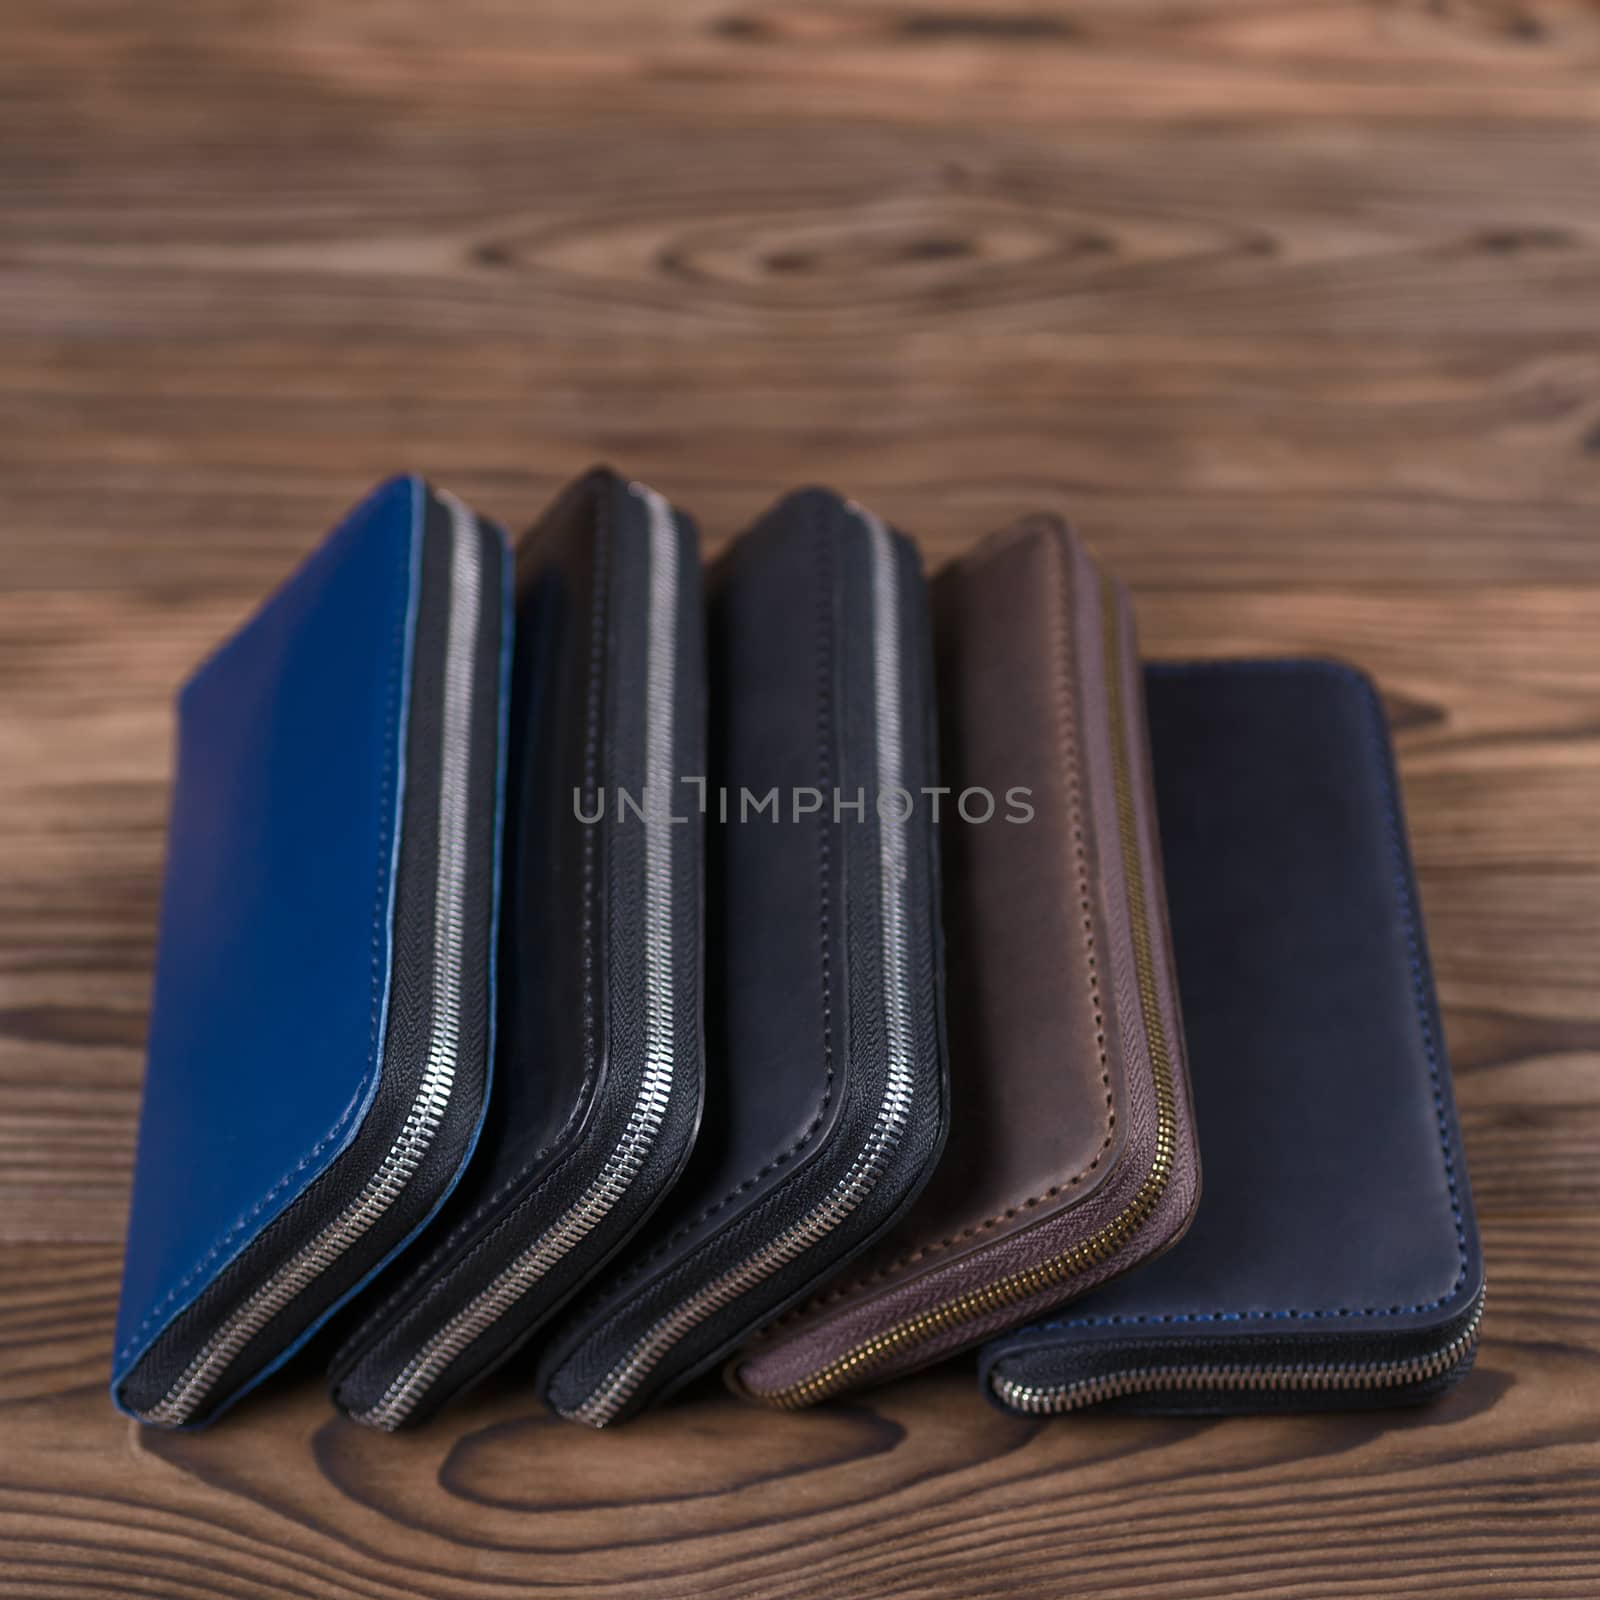 Five handmade leather porte-monnaie lies on wooden textured background.  Side view. Stock photo of luxury accessories with blurred background..